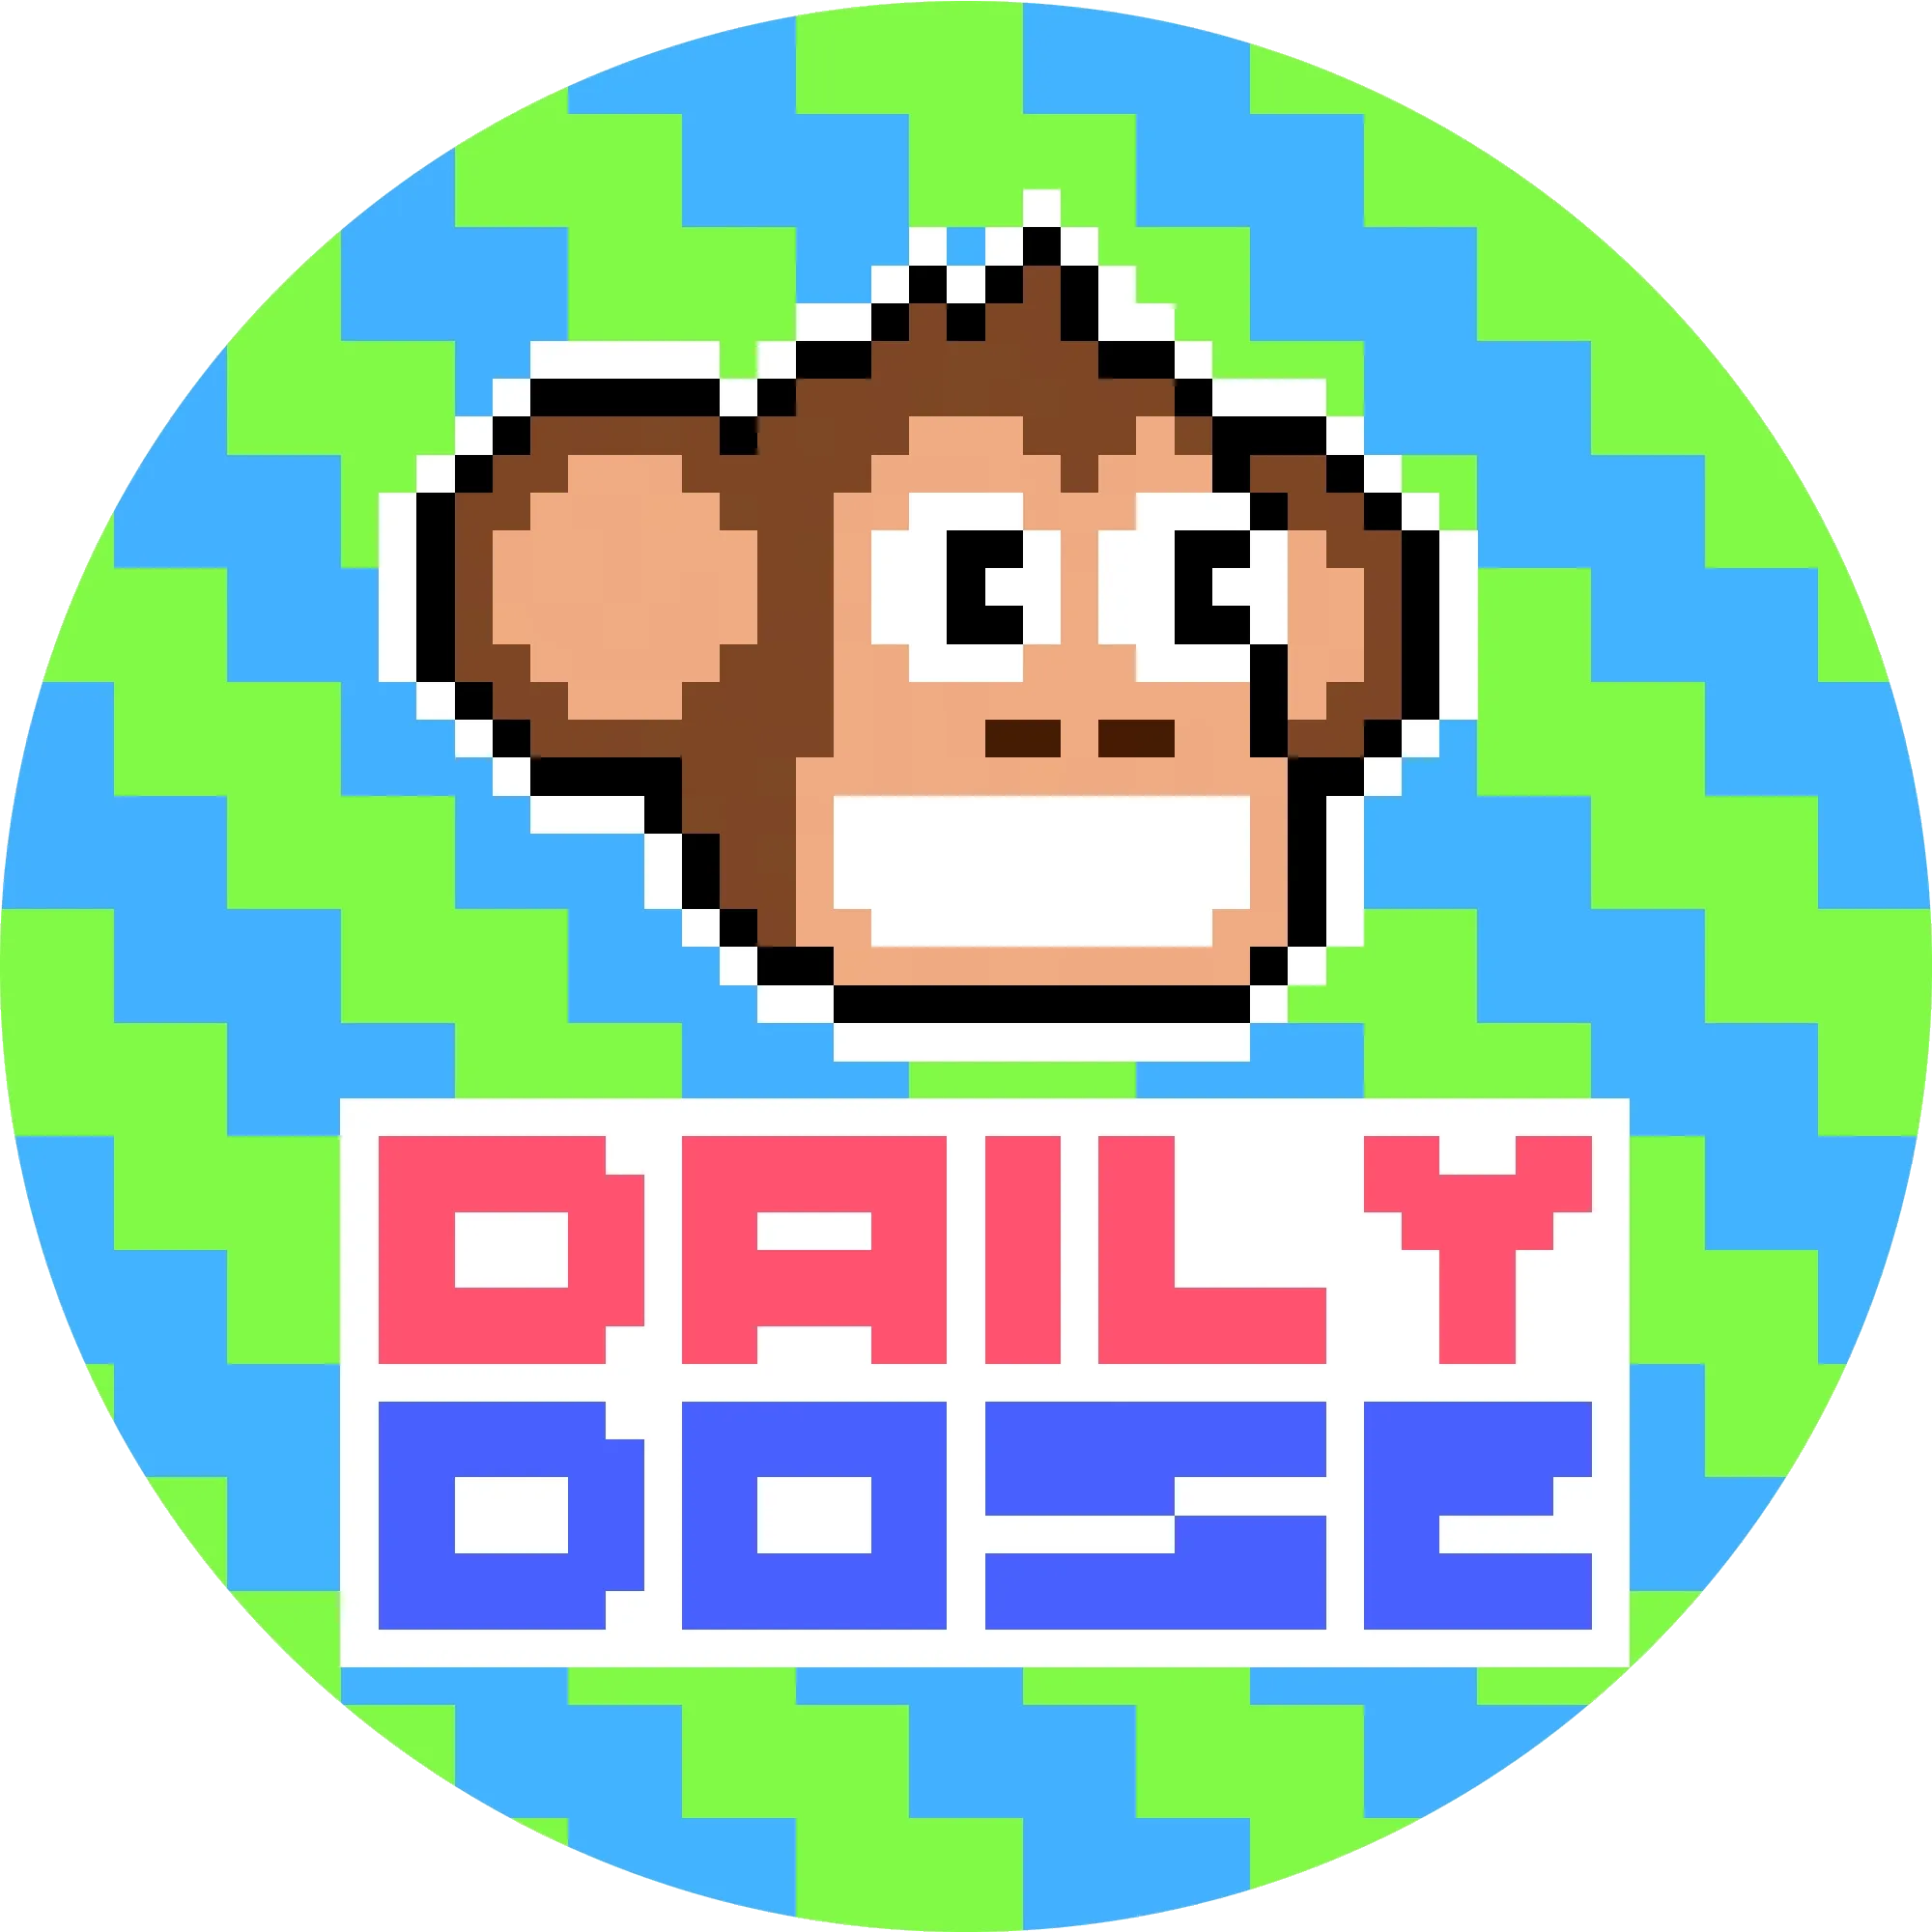 December 13th, 2022 - The Daily Dose